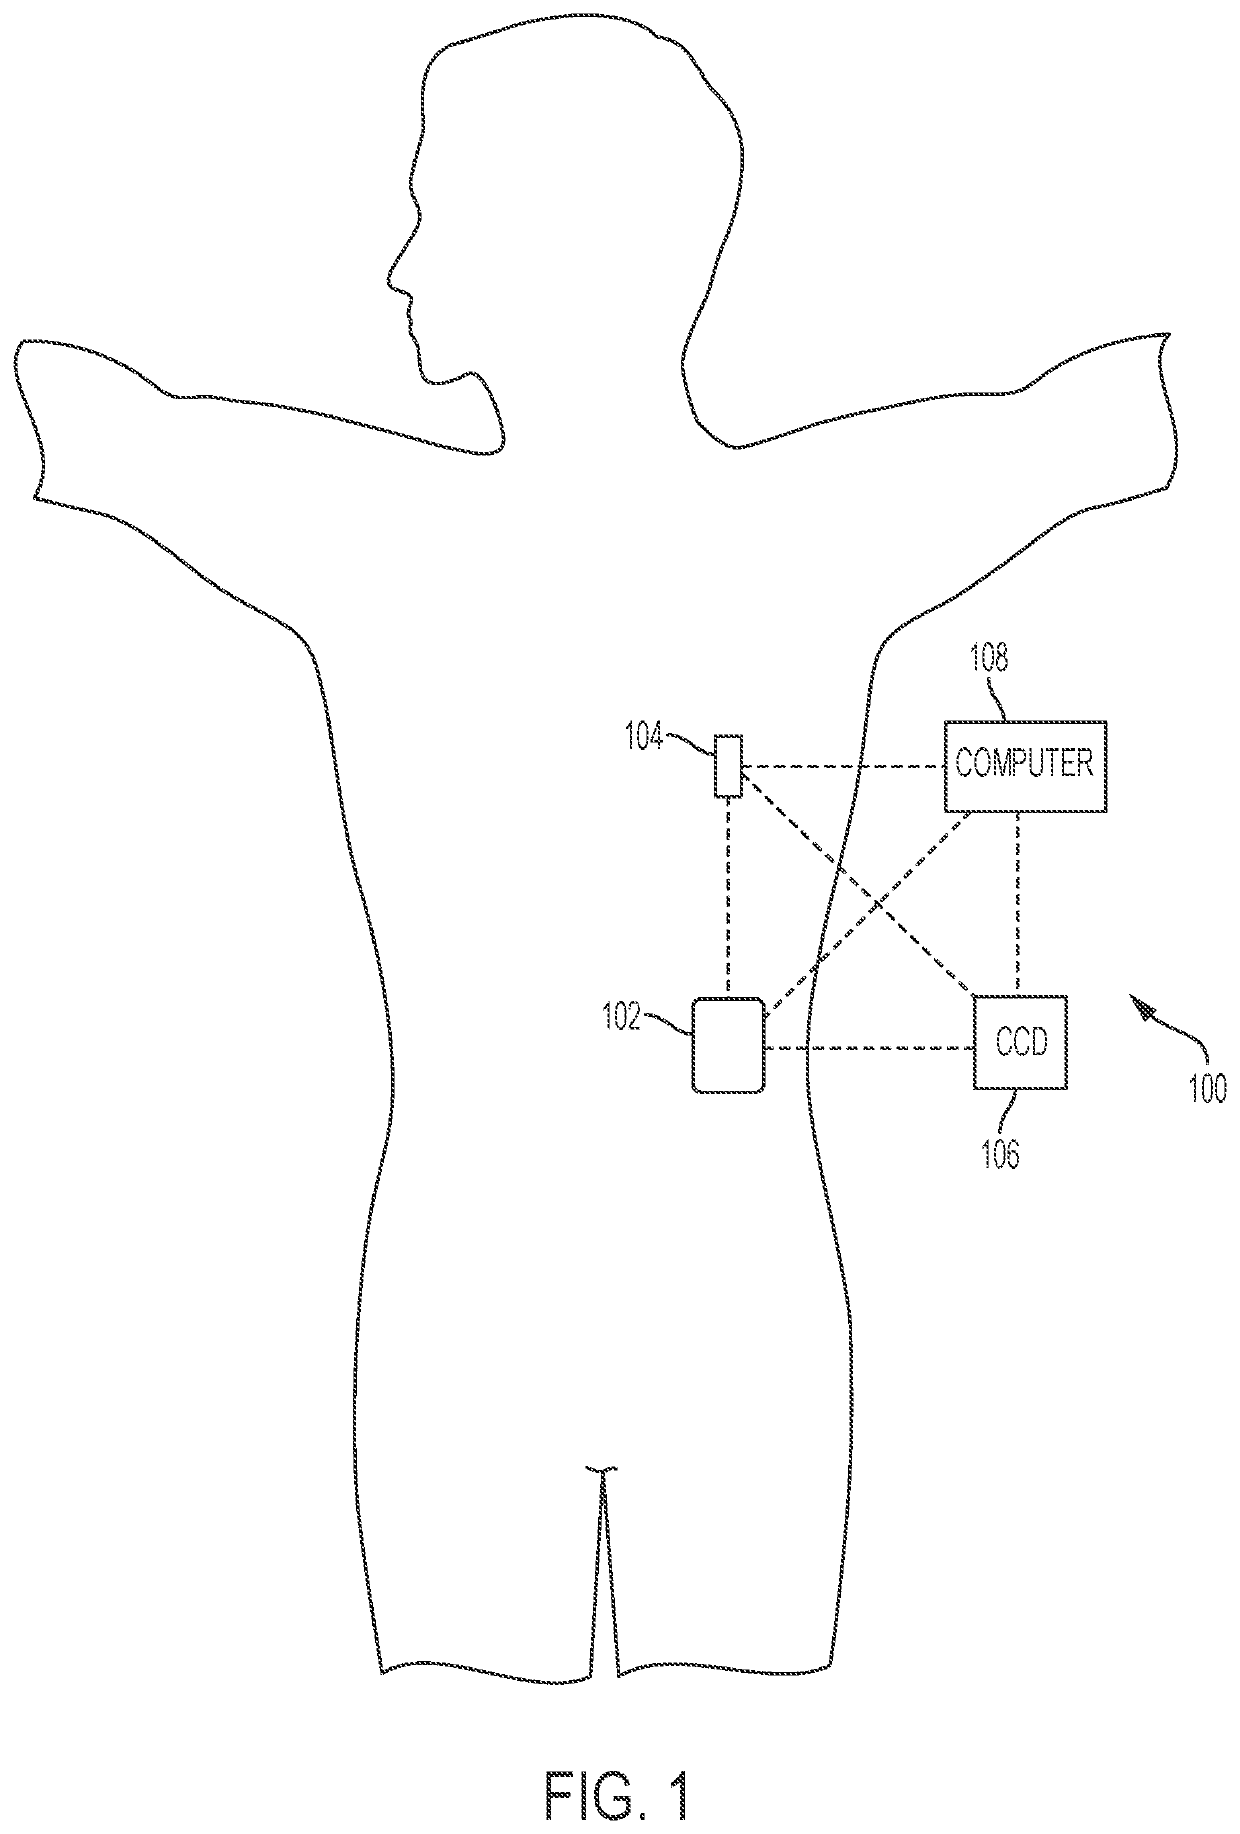 Insulin infusion device with efficient confirmation routine for blood glucose measurements